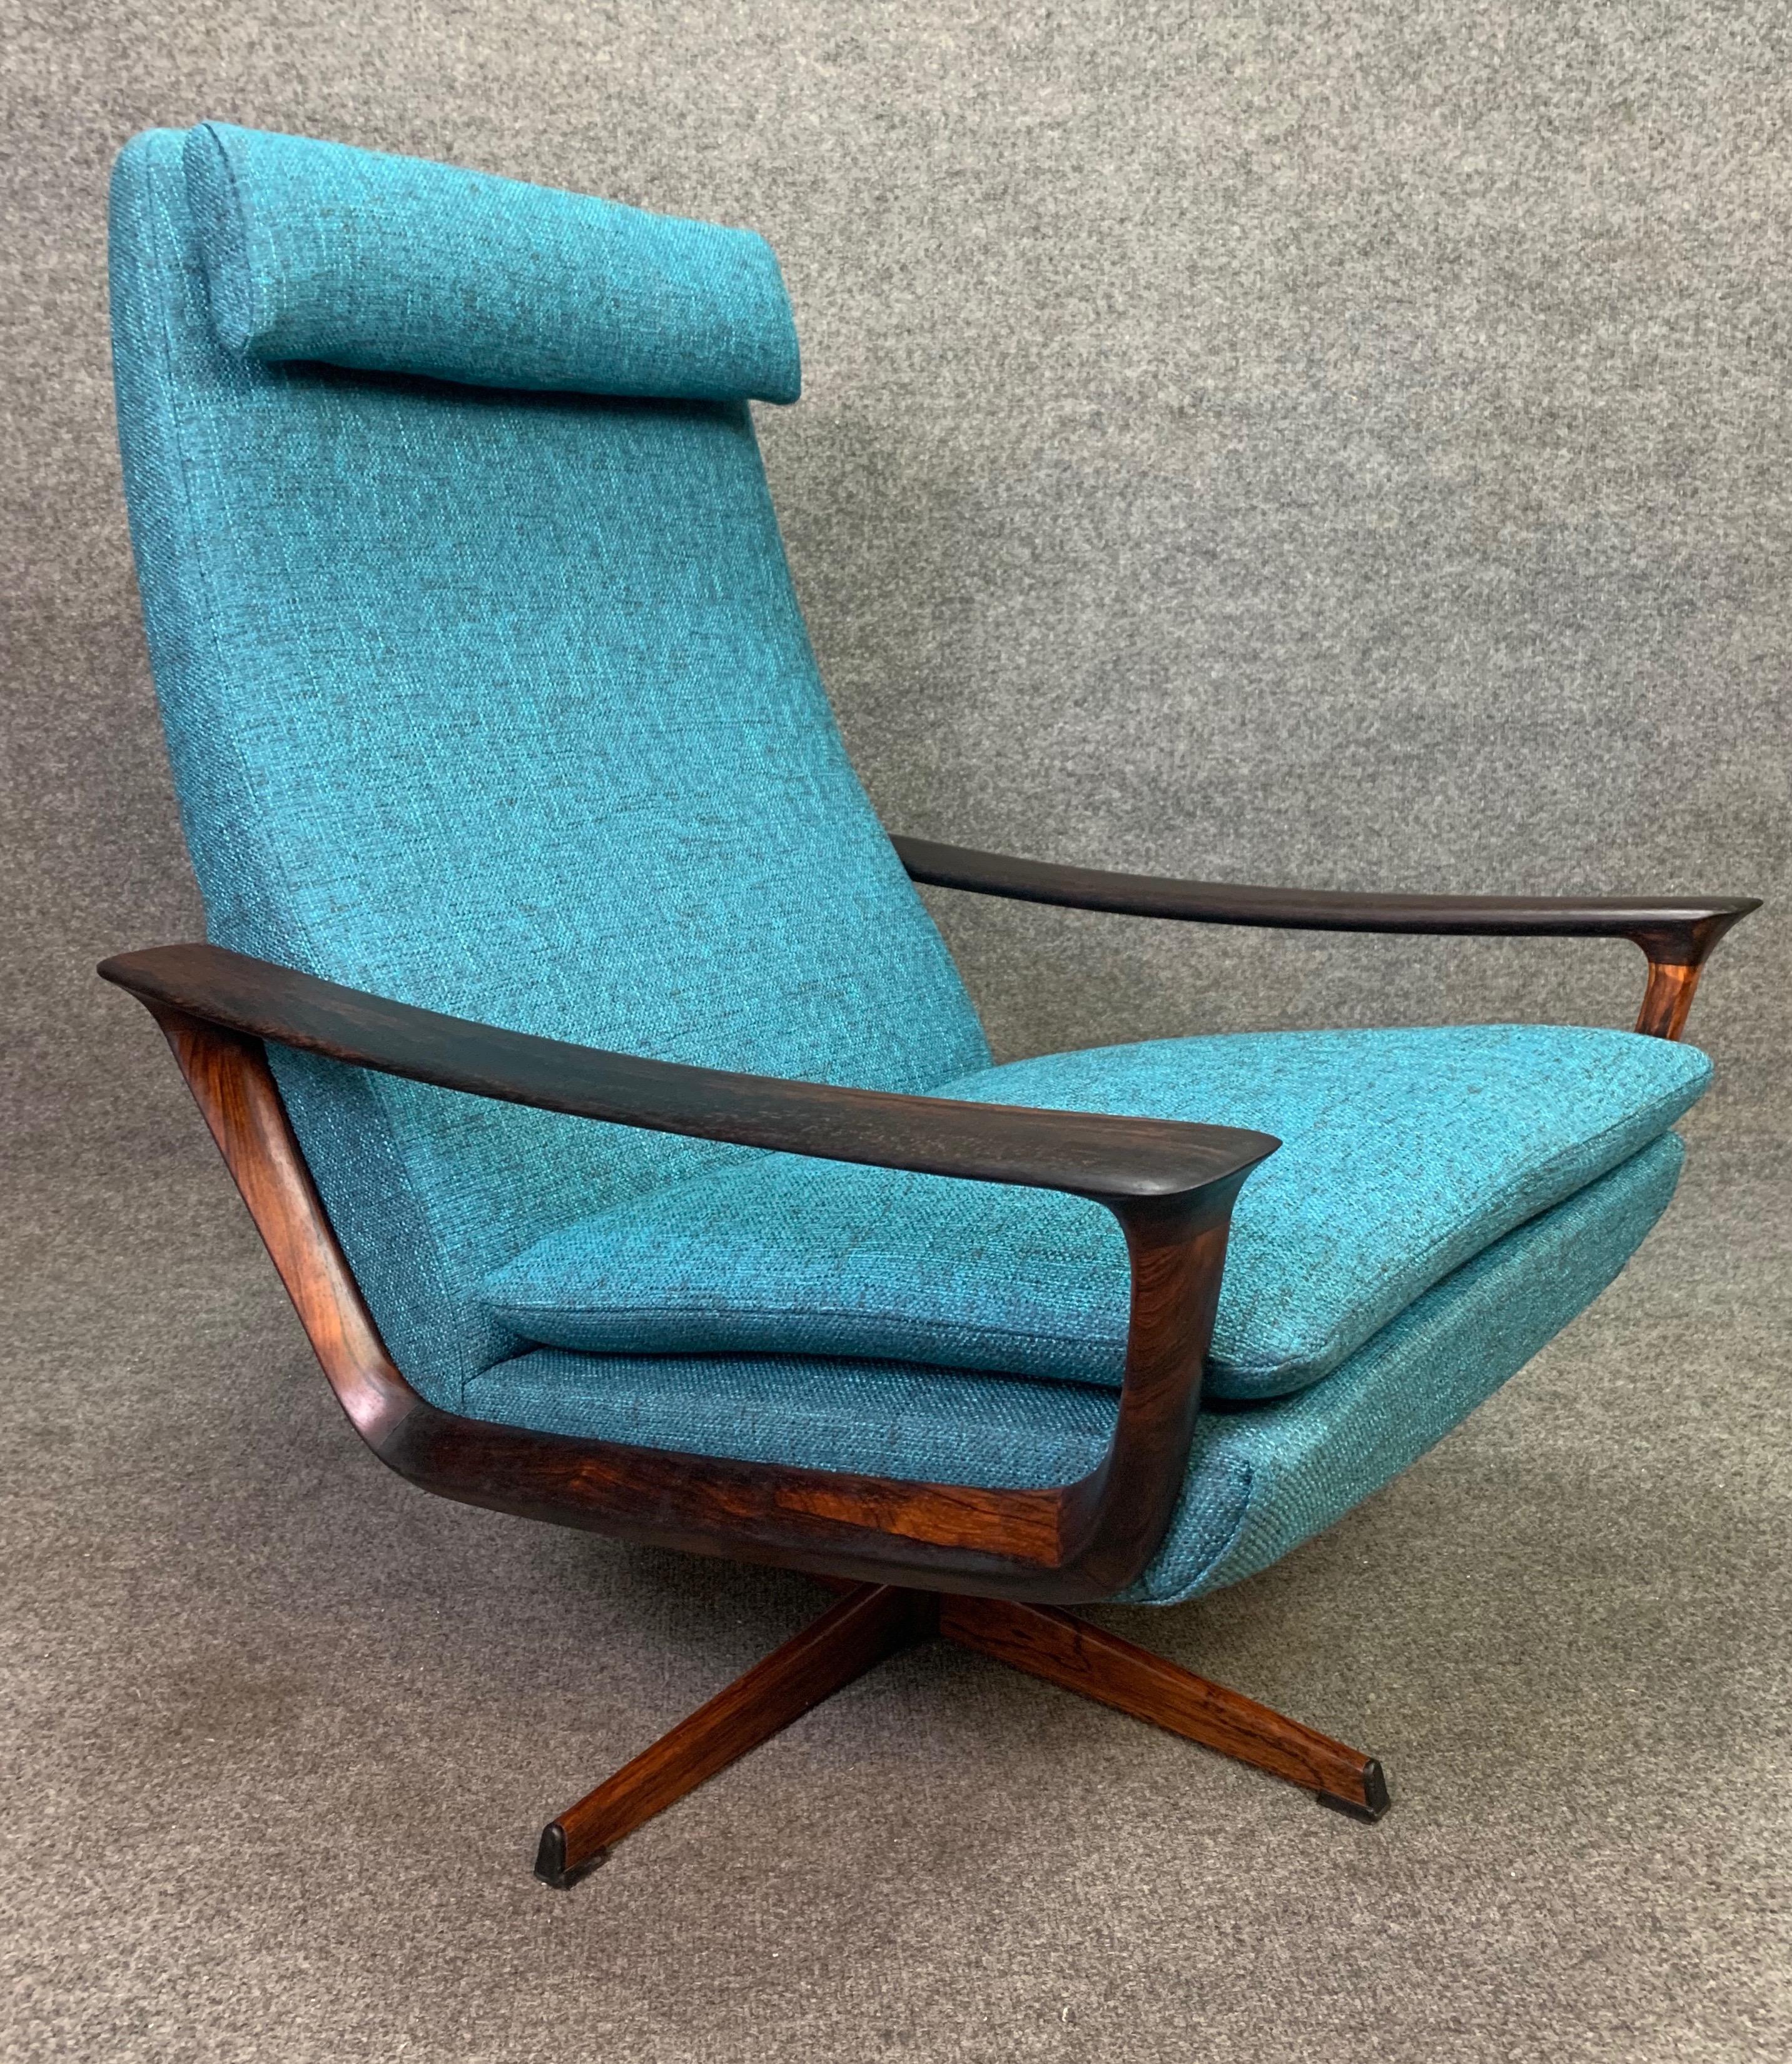 Here is a special Scandinavian Modern easy chair in rosewood designed by Johannes Andersen and manufactured by Trensum in Sweden in the 1960s.
This rare and comfortable lounge chair received a brand new period correct upholstery, sourced from the